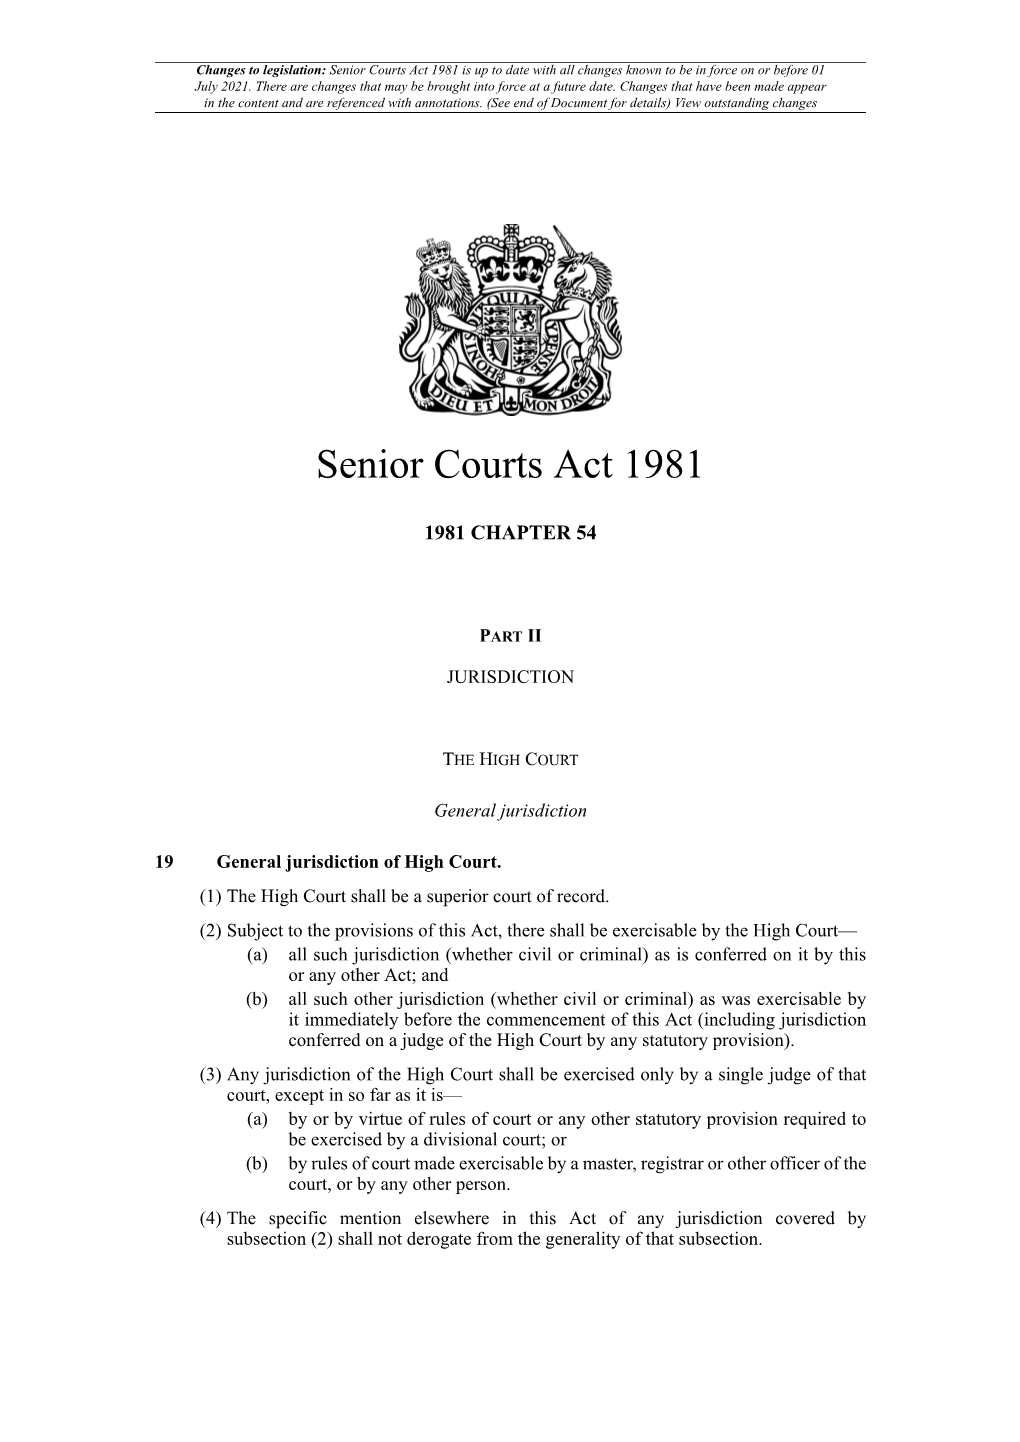 Senior Courts Act 1981 Is up to Date with All Changes Known to Be in Force on Or Before 01 July 2021